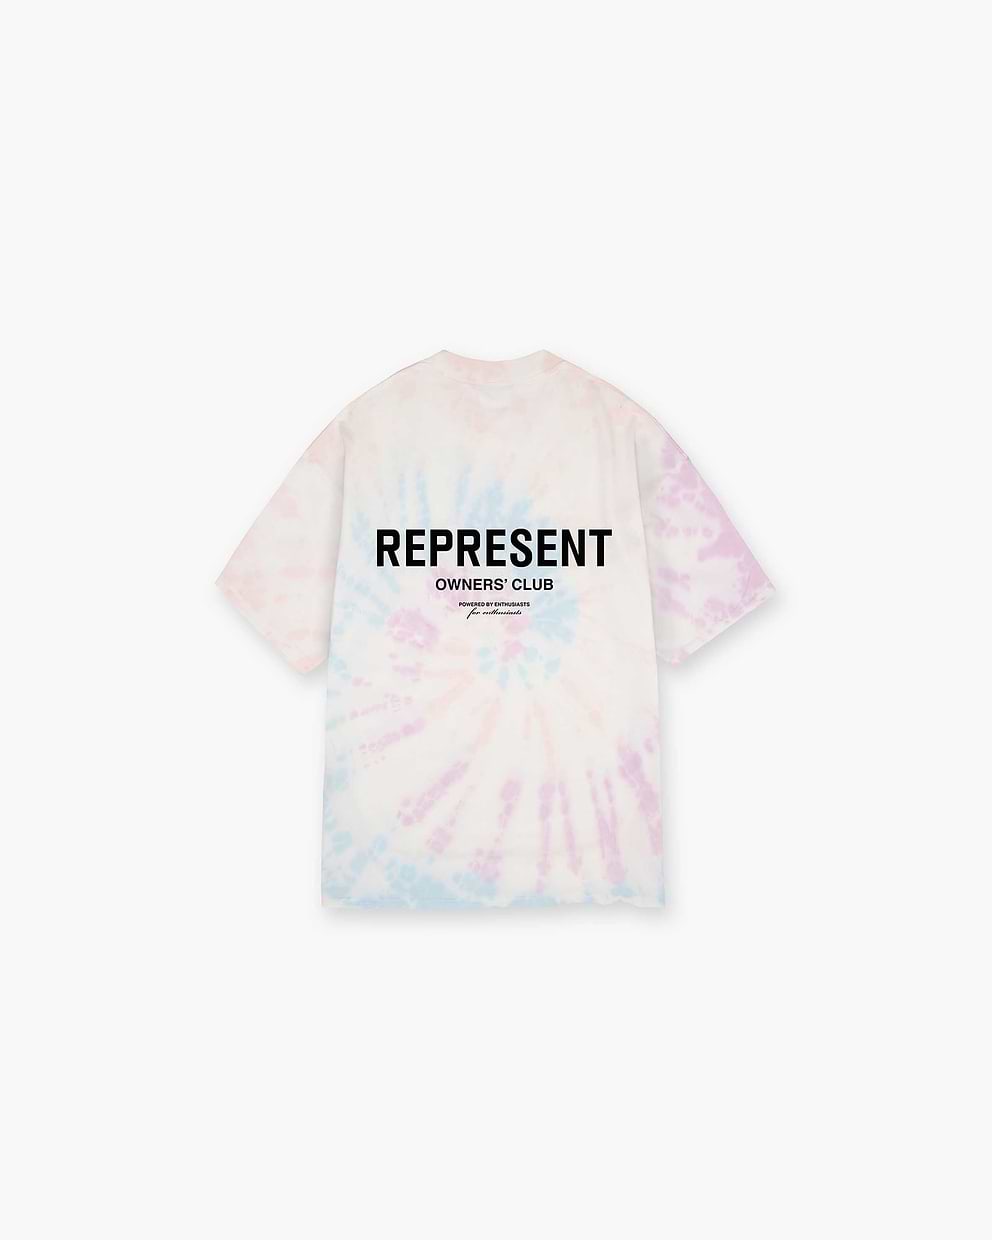 Represent Owners Club T-Shirt - Tie Dye